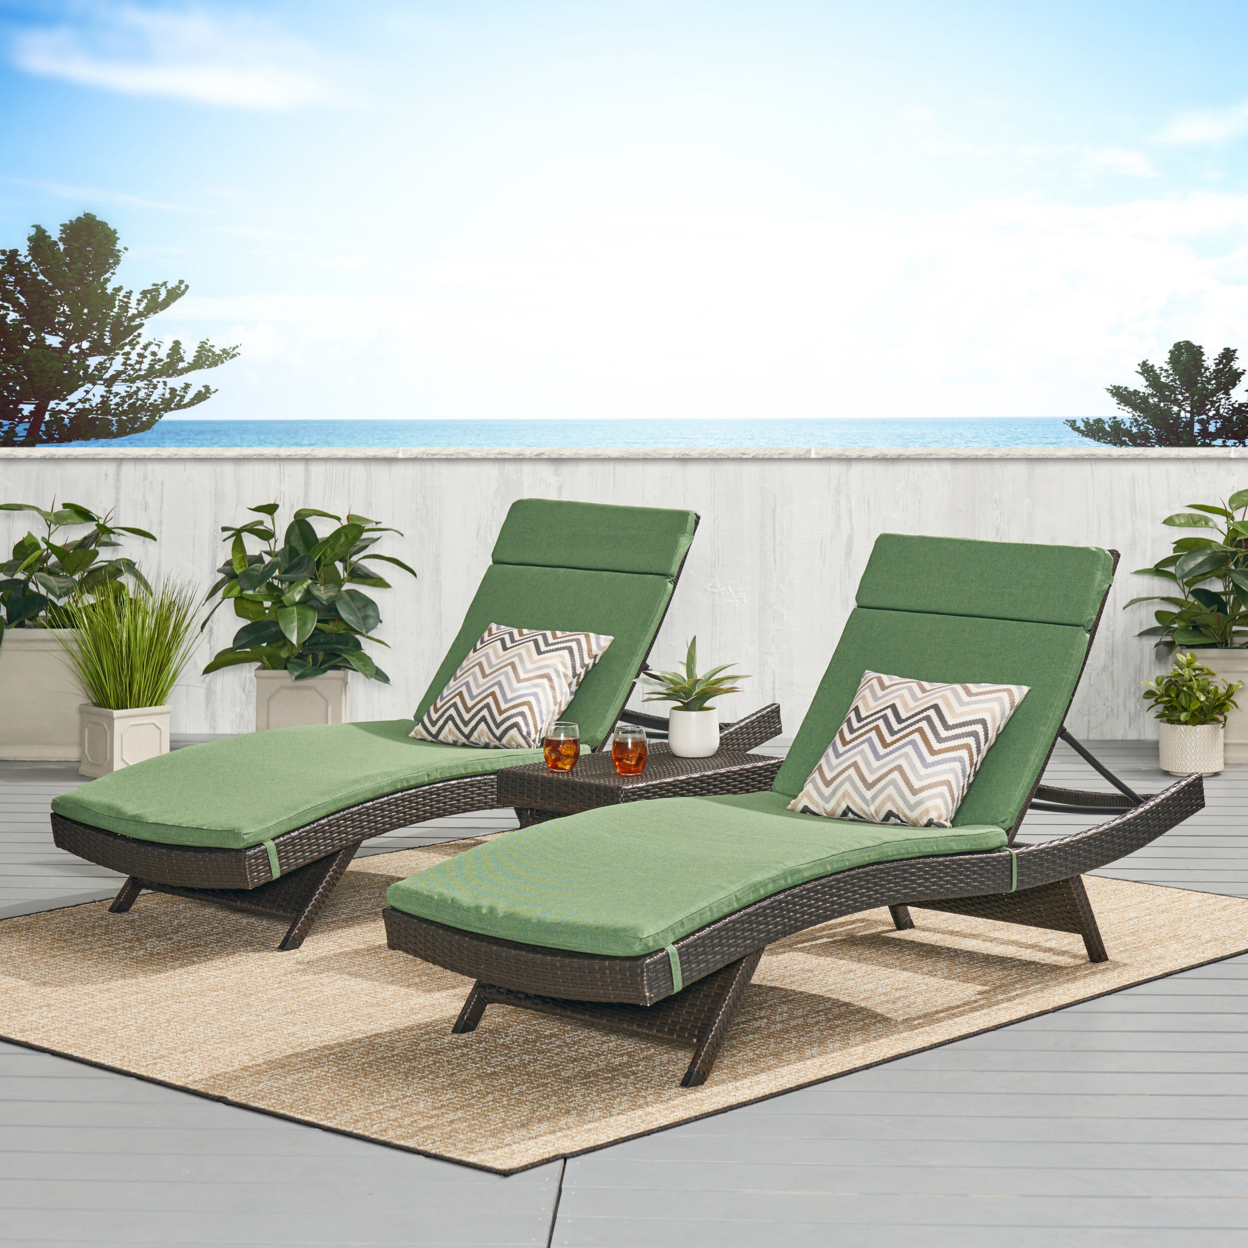 Lakeport 3pc Outdoor Wicker Chaise Lounge Chair & Table Set With Cushions - Jungle Green Cushion, Brown